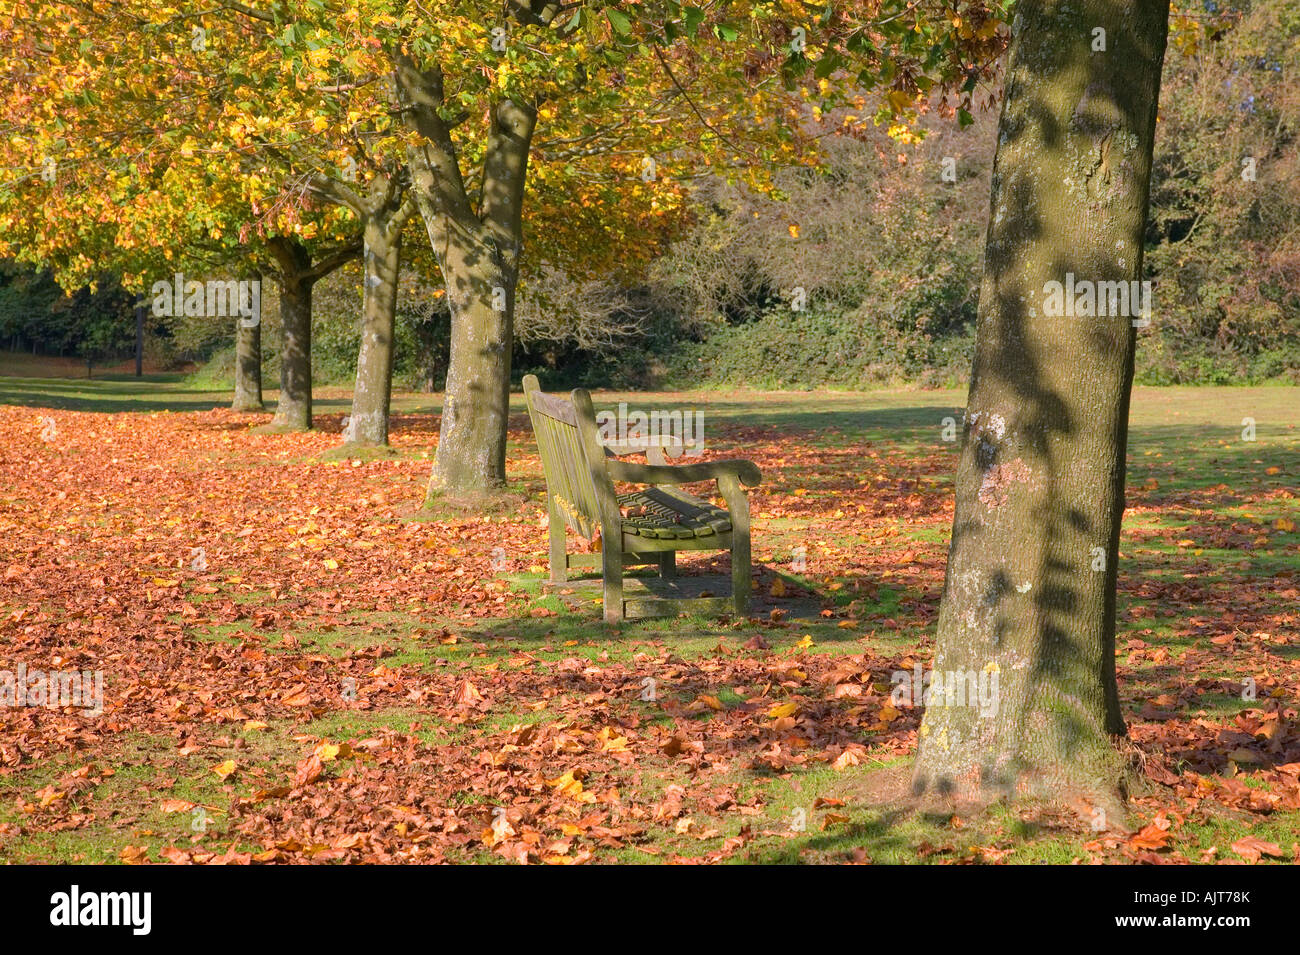 A park bench amongst trees in autumn colour Stock Photo